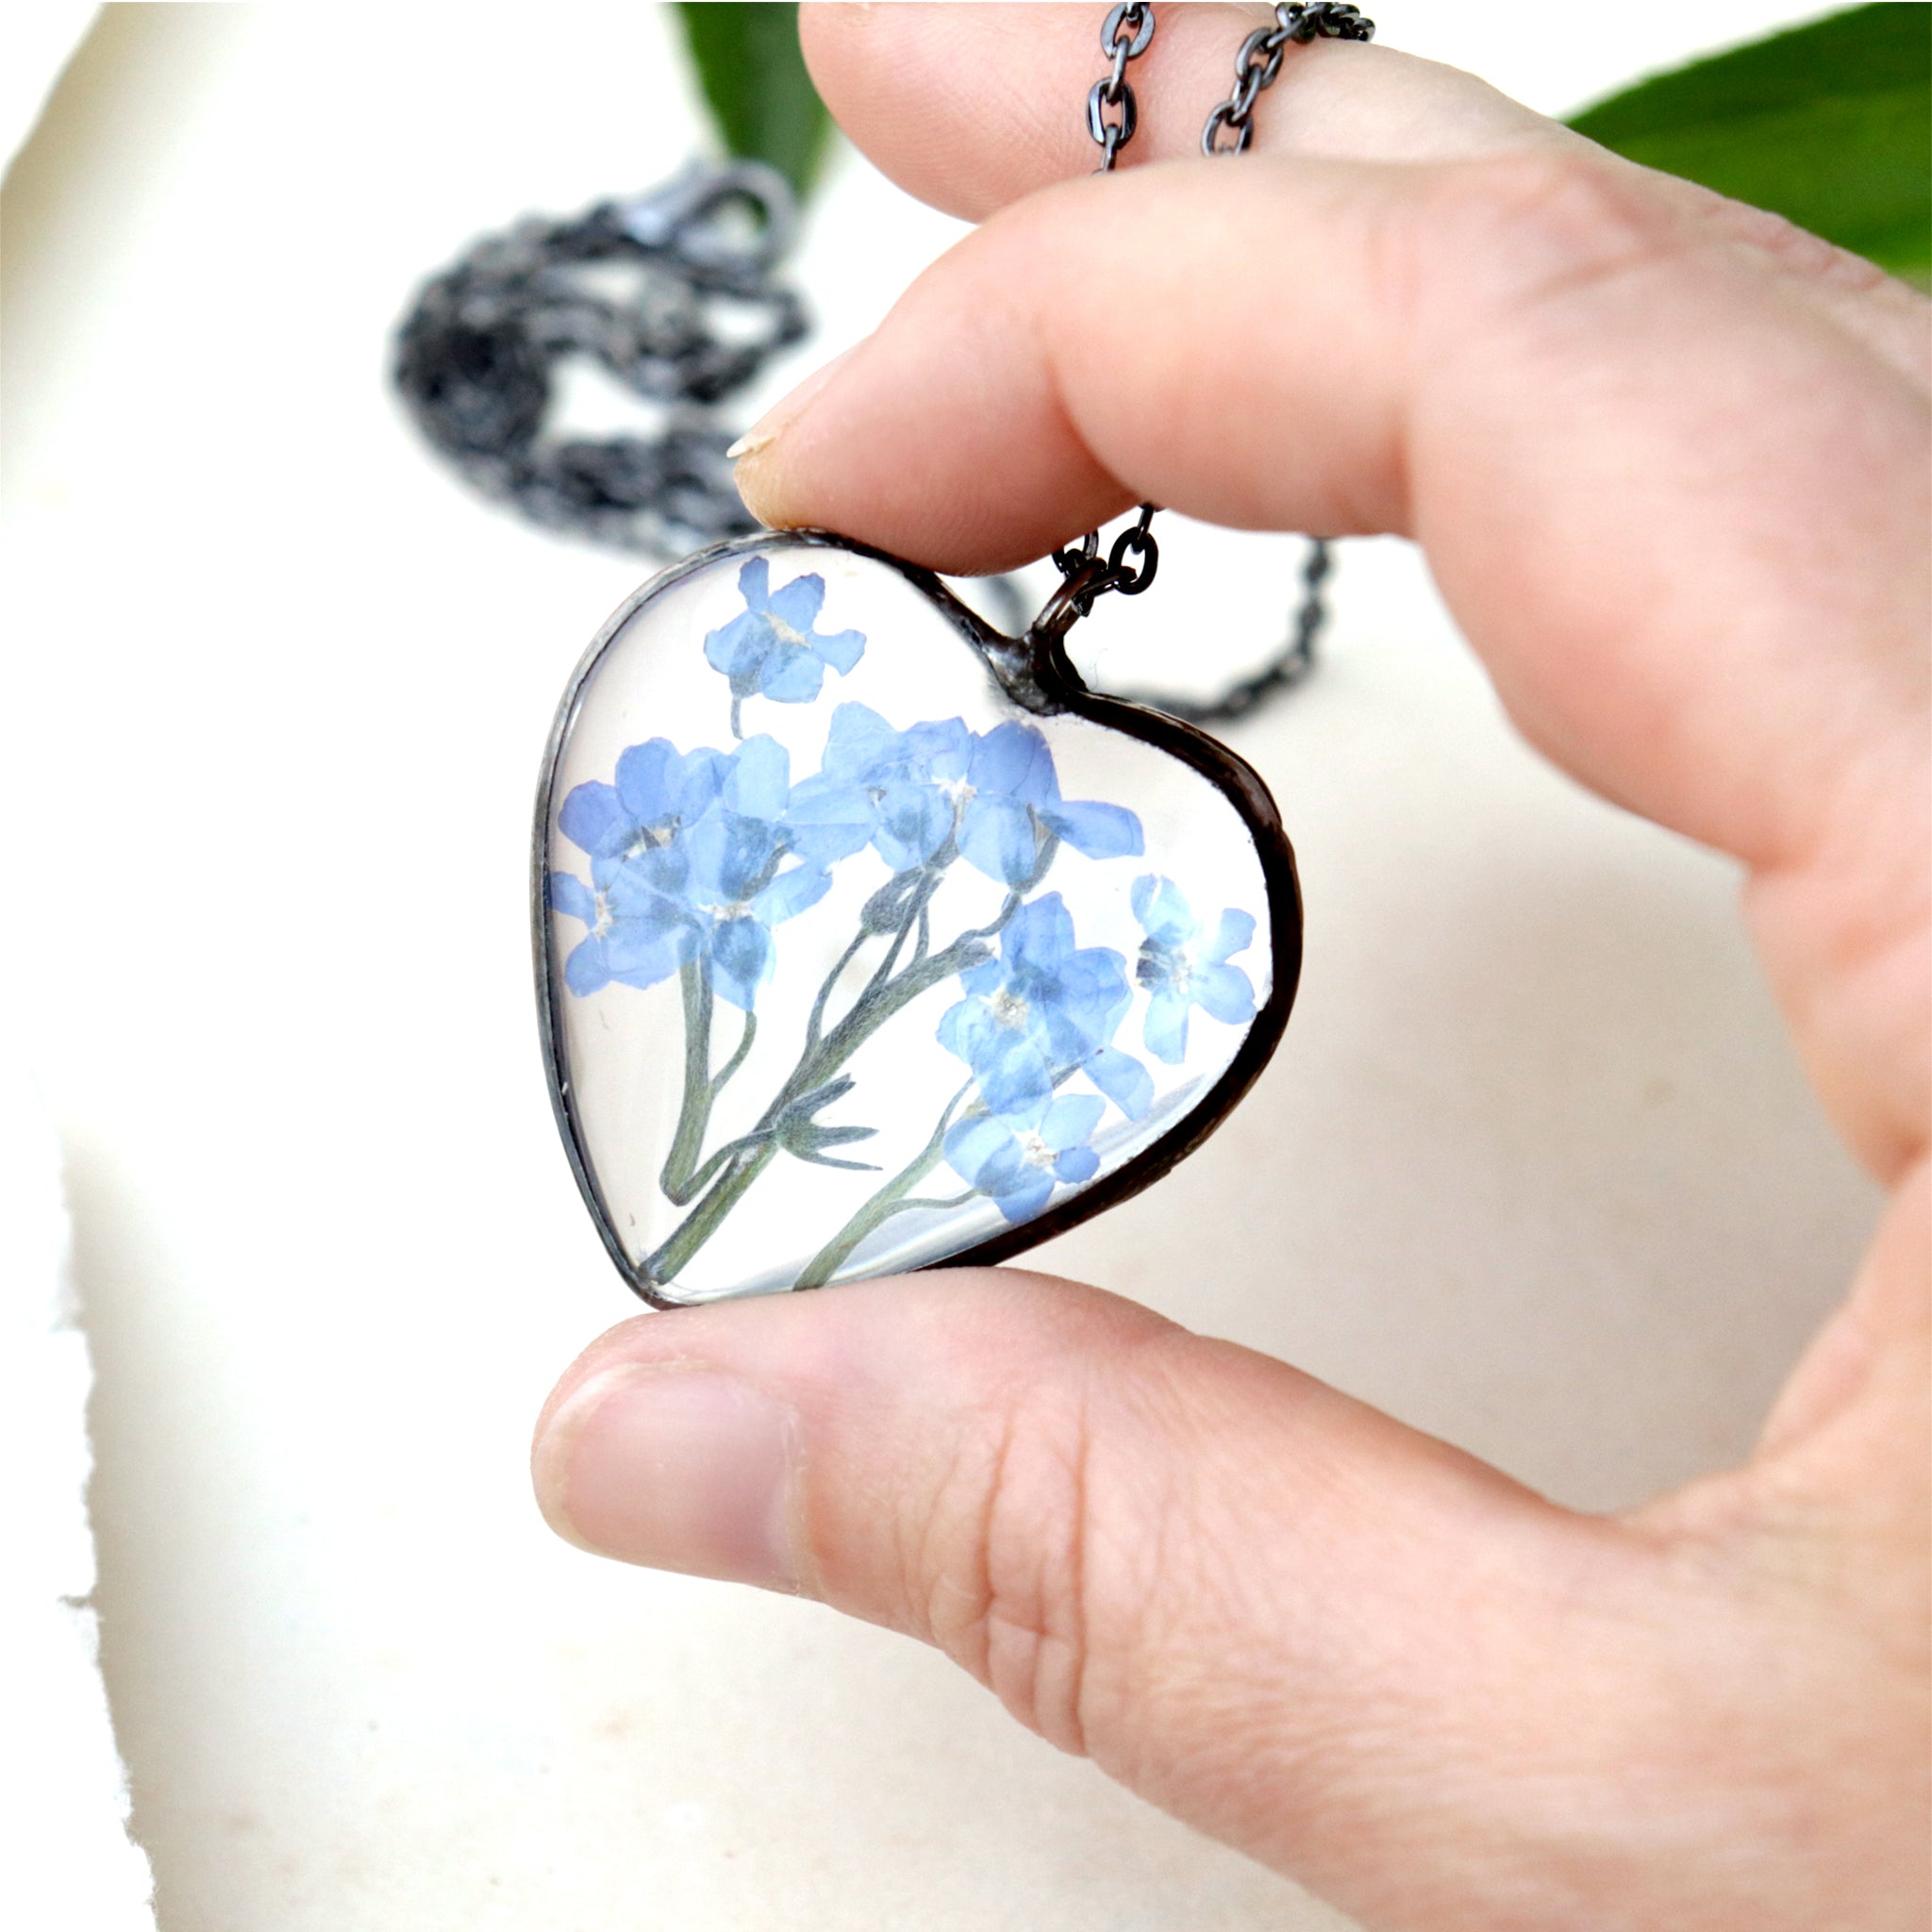 Forget-me-not heart shaped necklace being hold between thumb and index